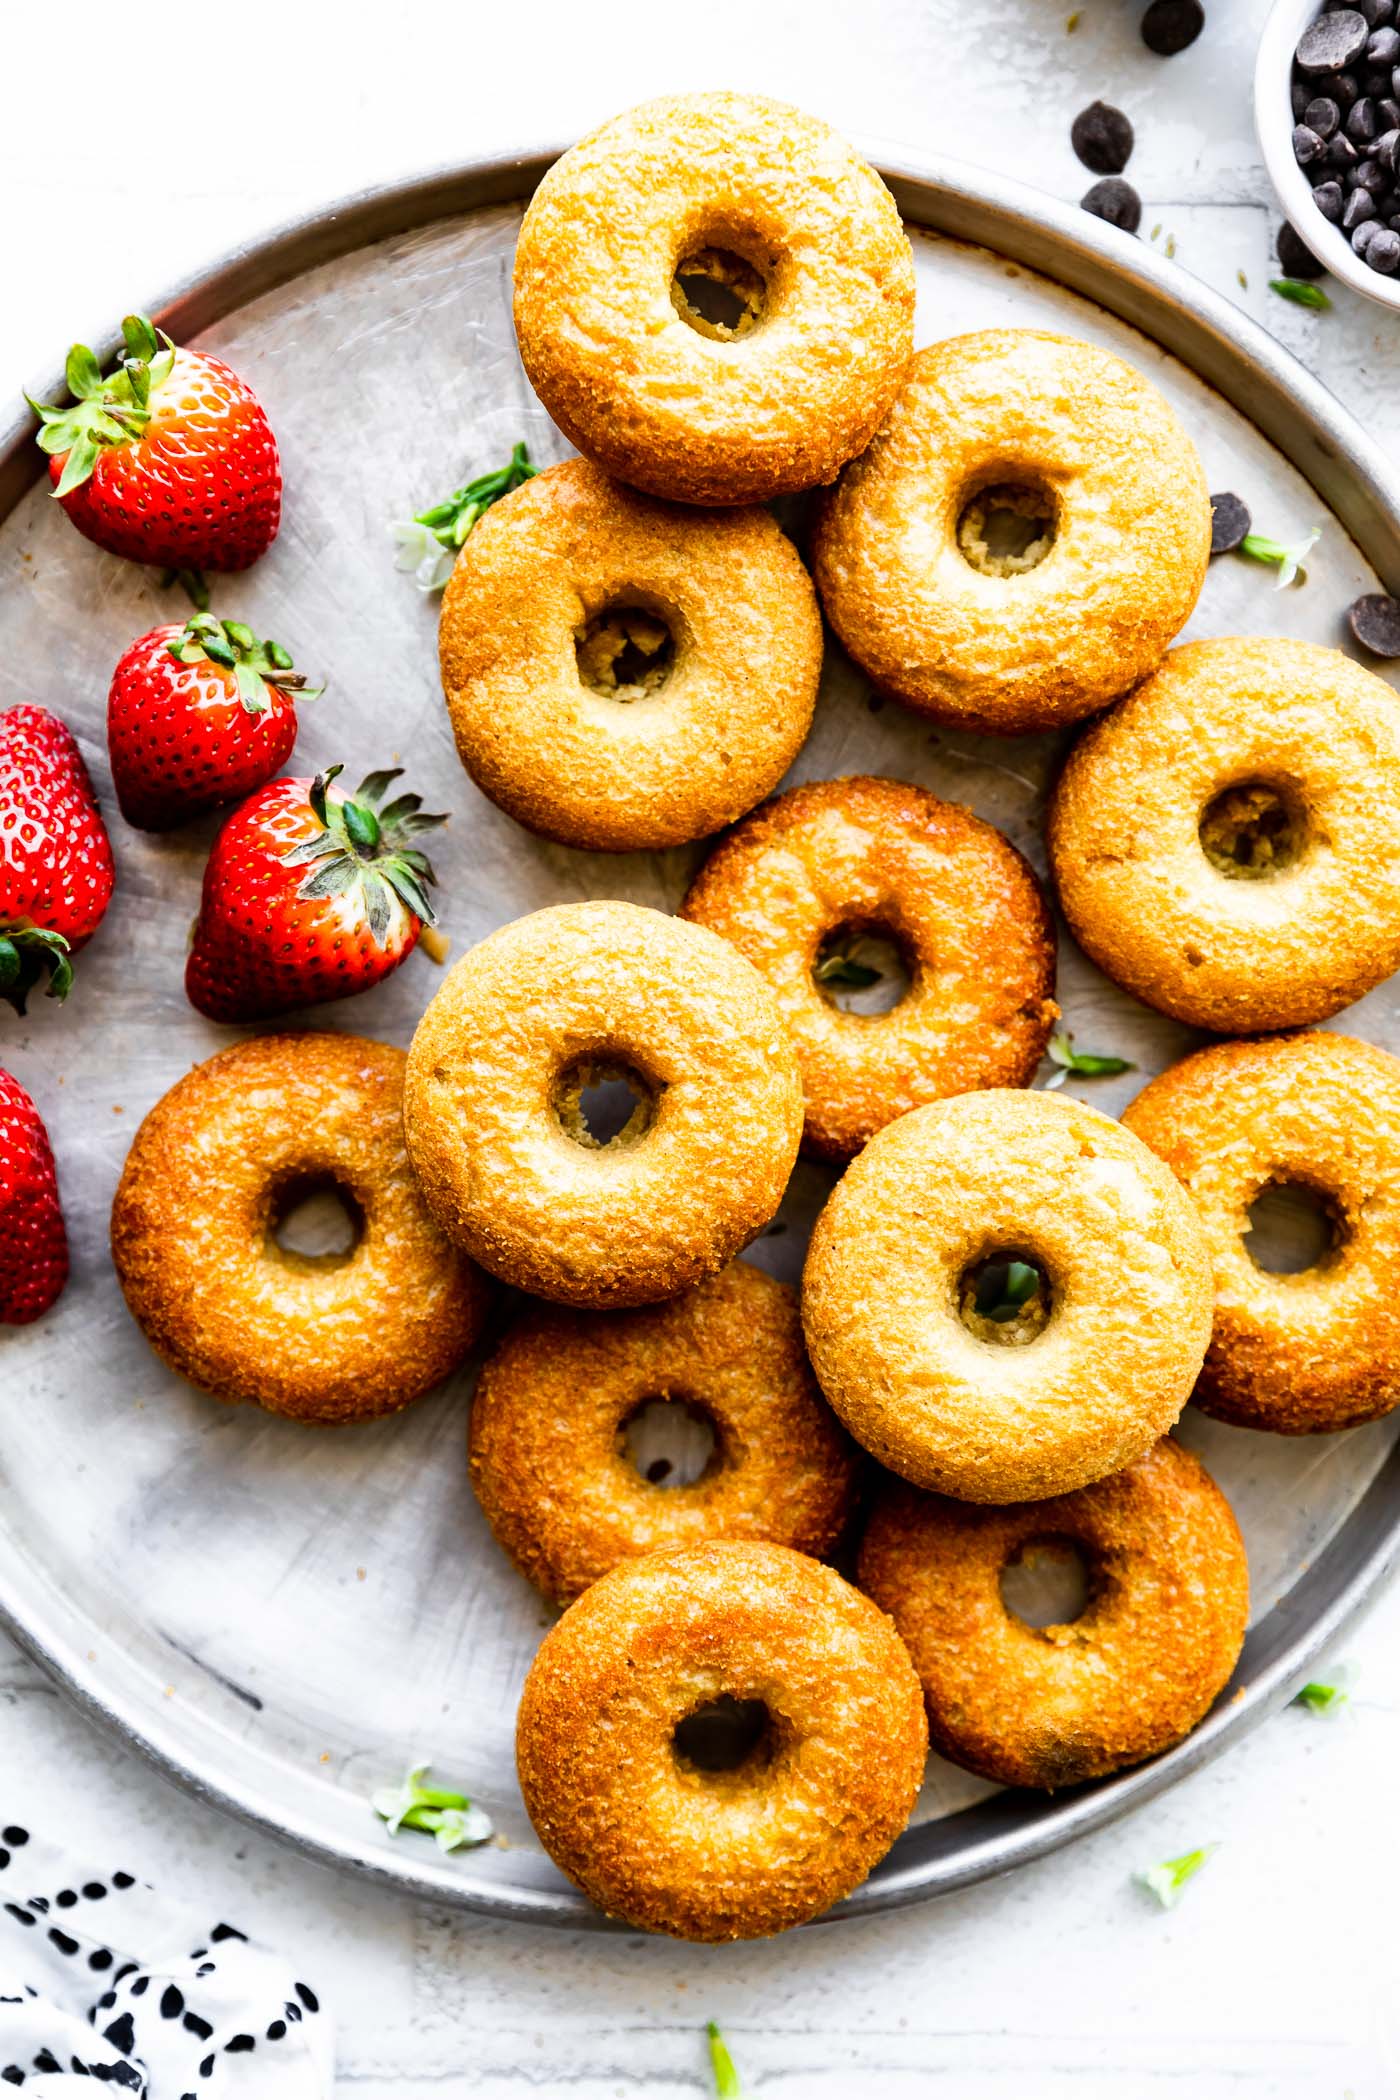 a plate full of unglazed baked vegan donuts with strawberries on the side